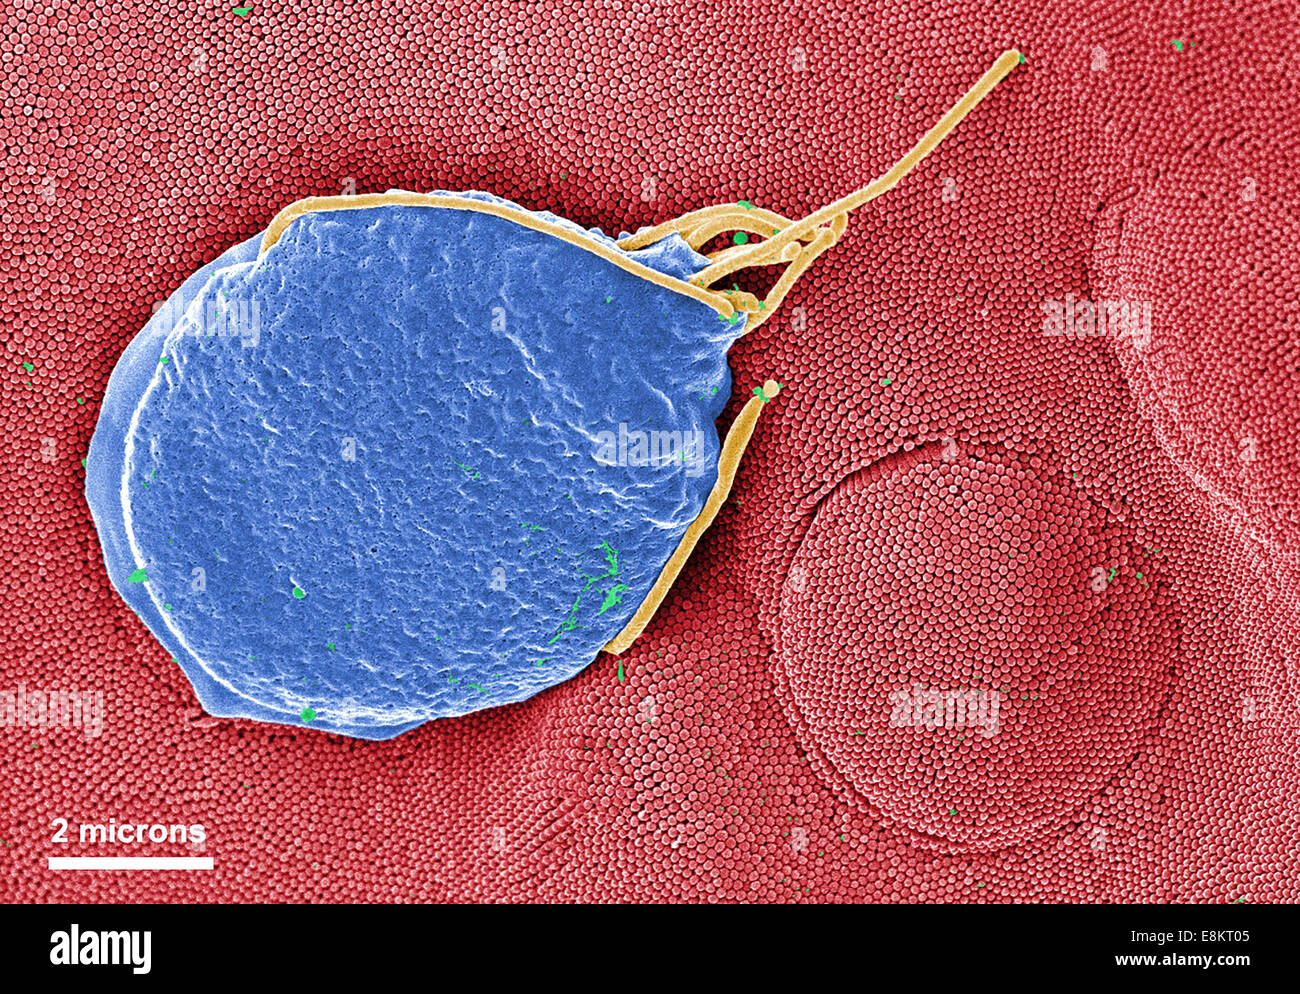 This digitally-colorized scanning electron micrograph (SEM) depicted Giardia muris protozoan adhering itself to microvillous Stock Photo